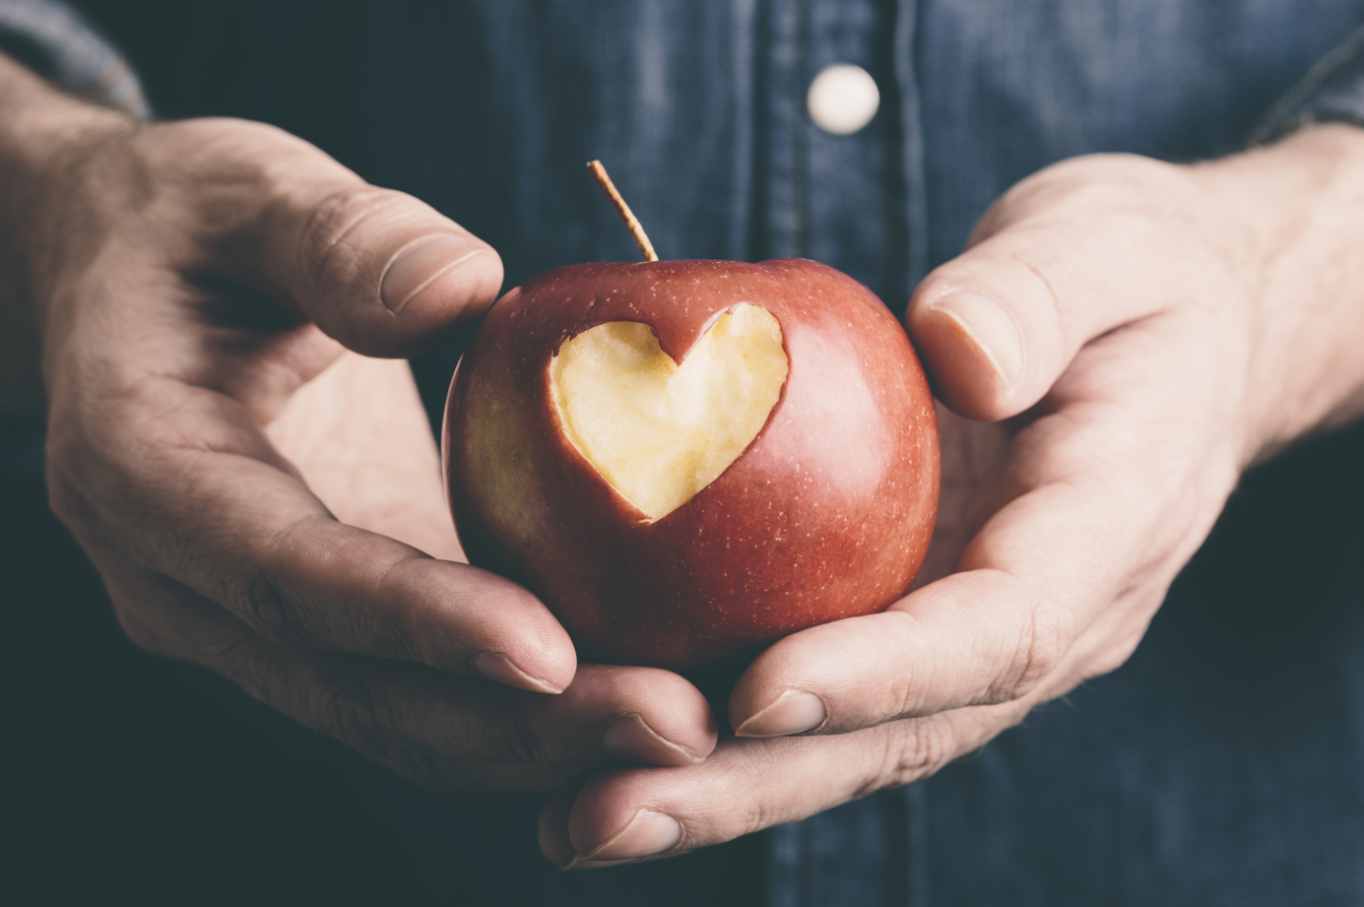 A person holding an apple with a heart cut out